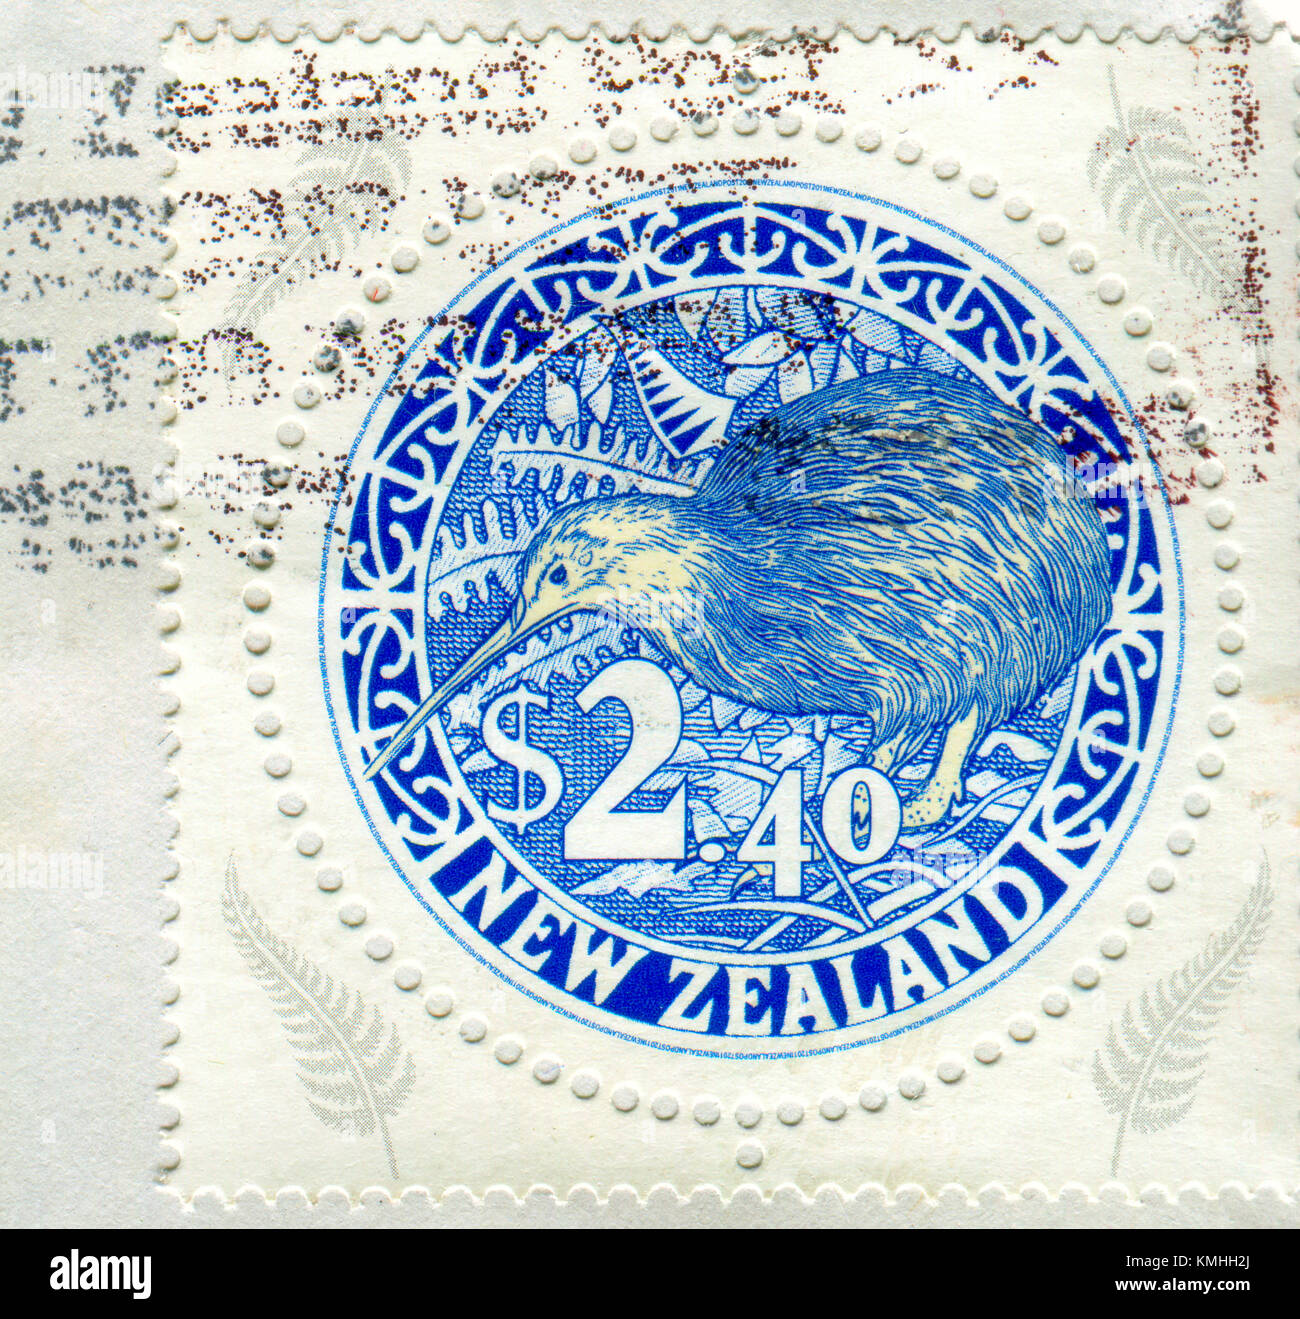 GOMEL, BELARUS, 5 DECEMBER 2017, Stamp printed in New Zealand shows image of the Kiwi or kiwis are flightless birds native to New Zealand, in the genu Stock Photo